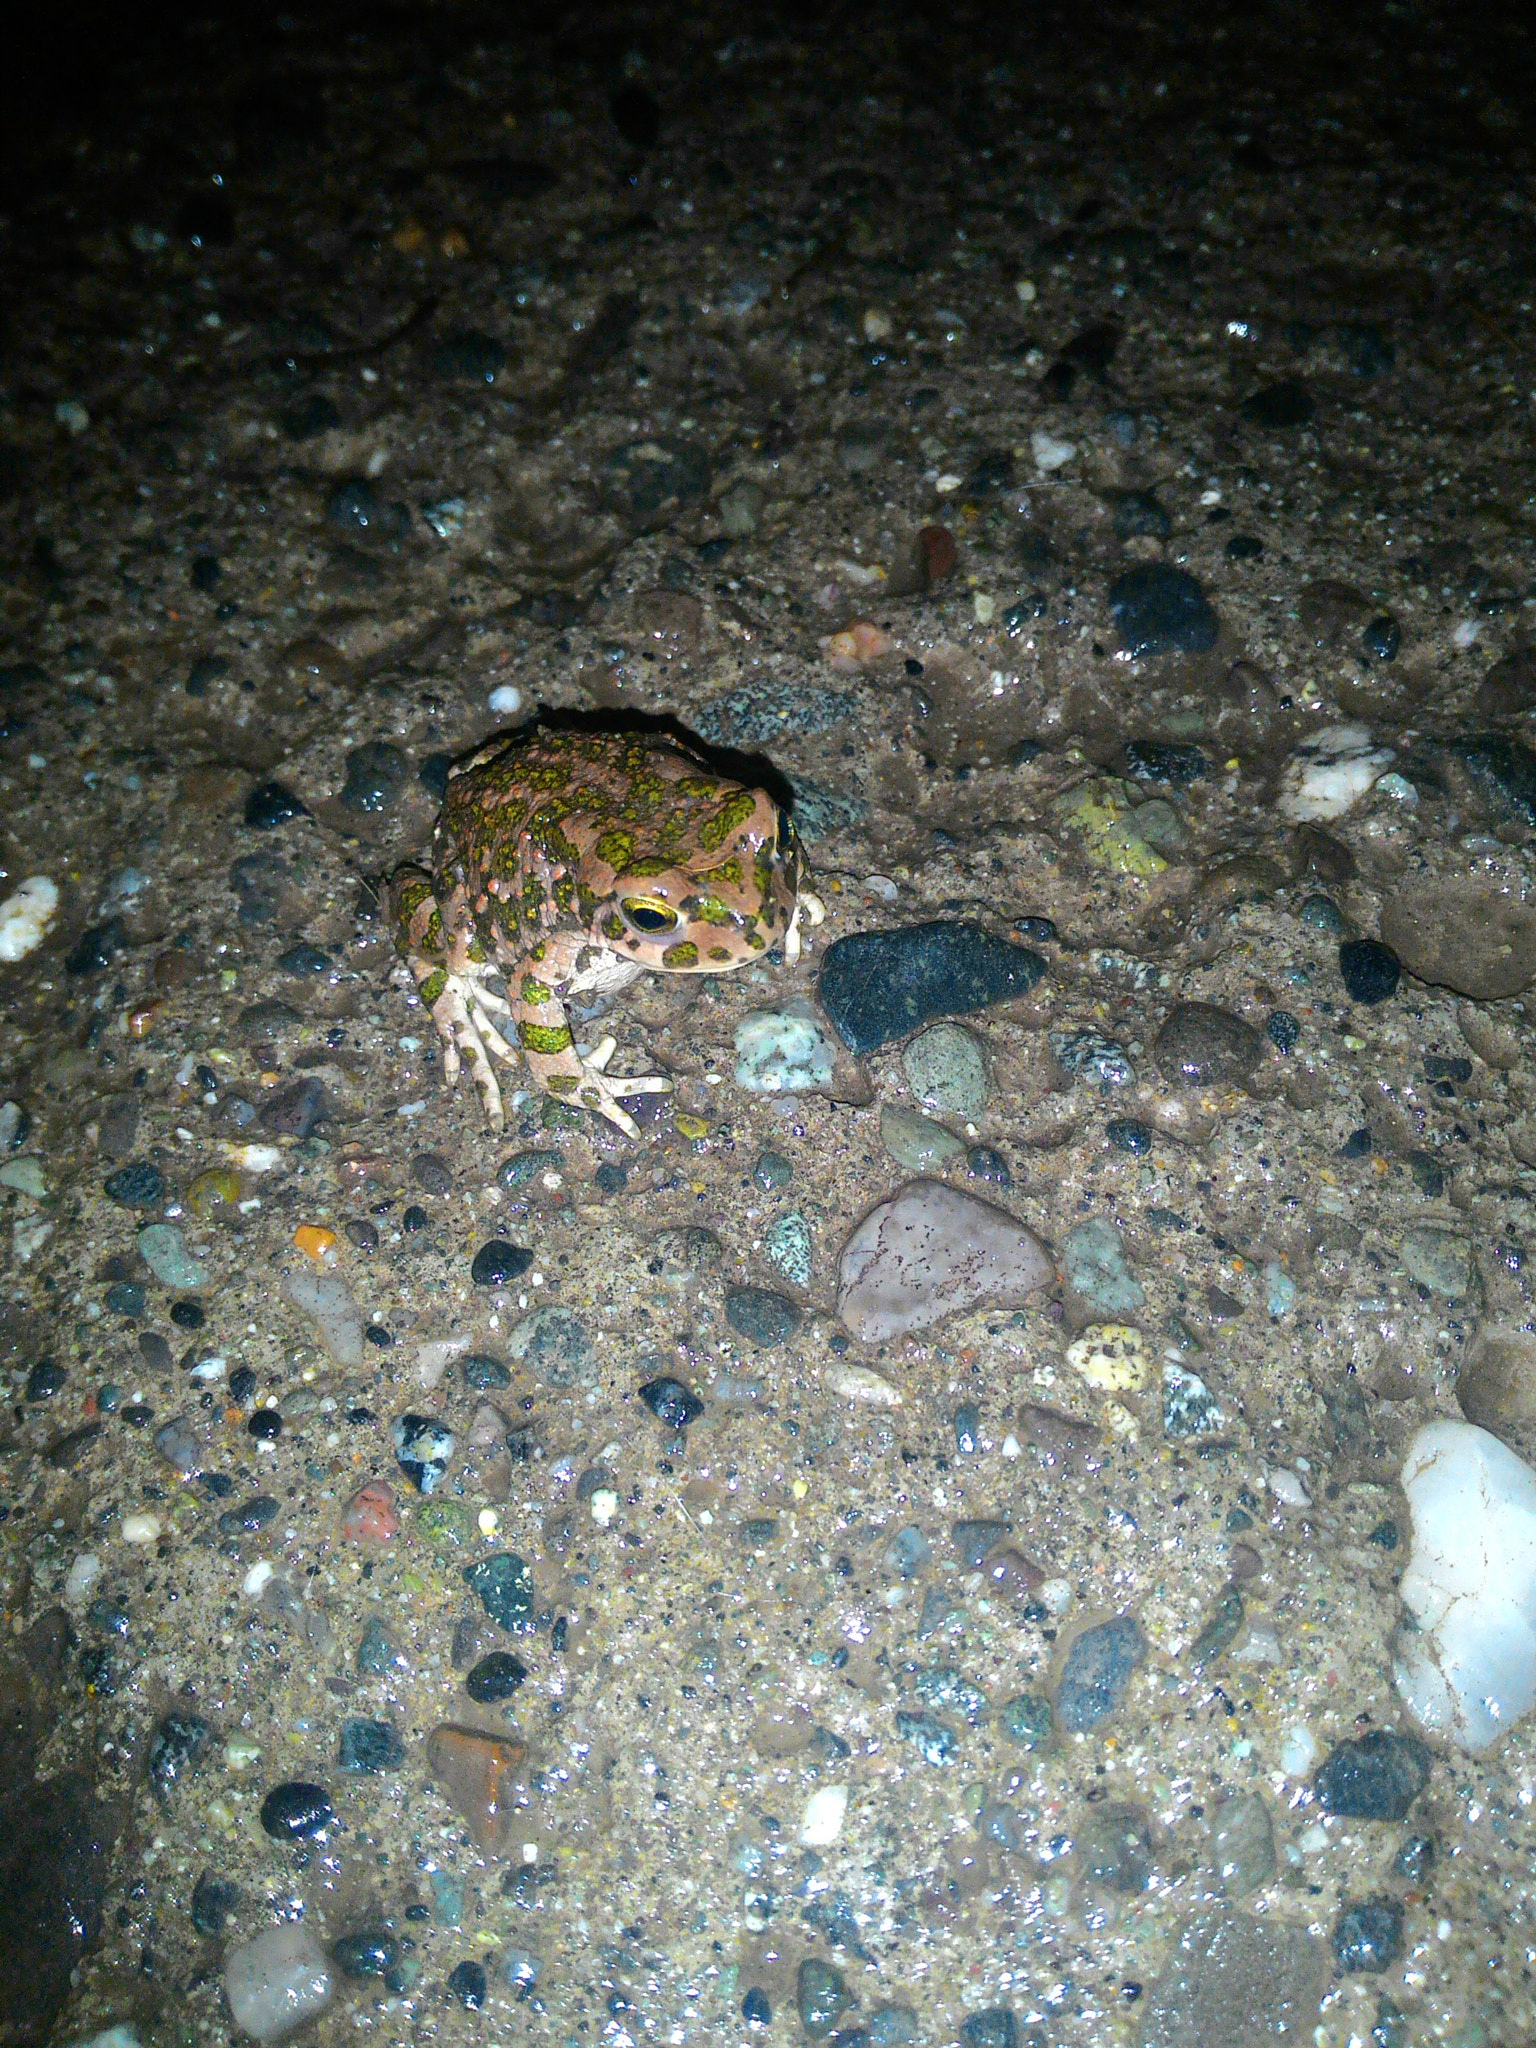 ASUS Z002 sample photo. The baby frog) photography